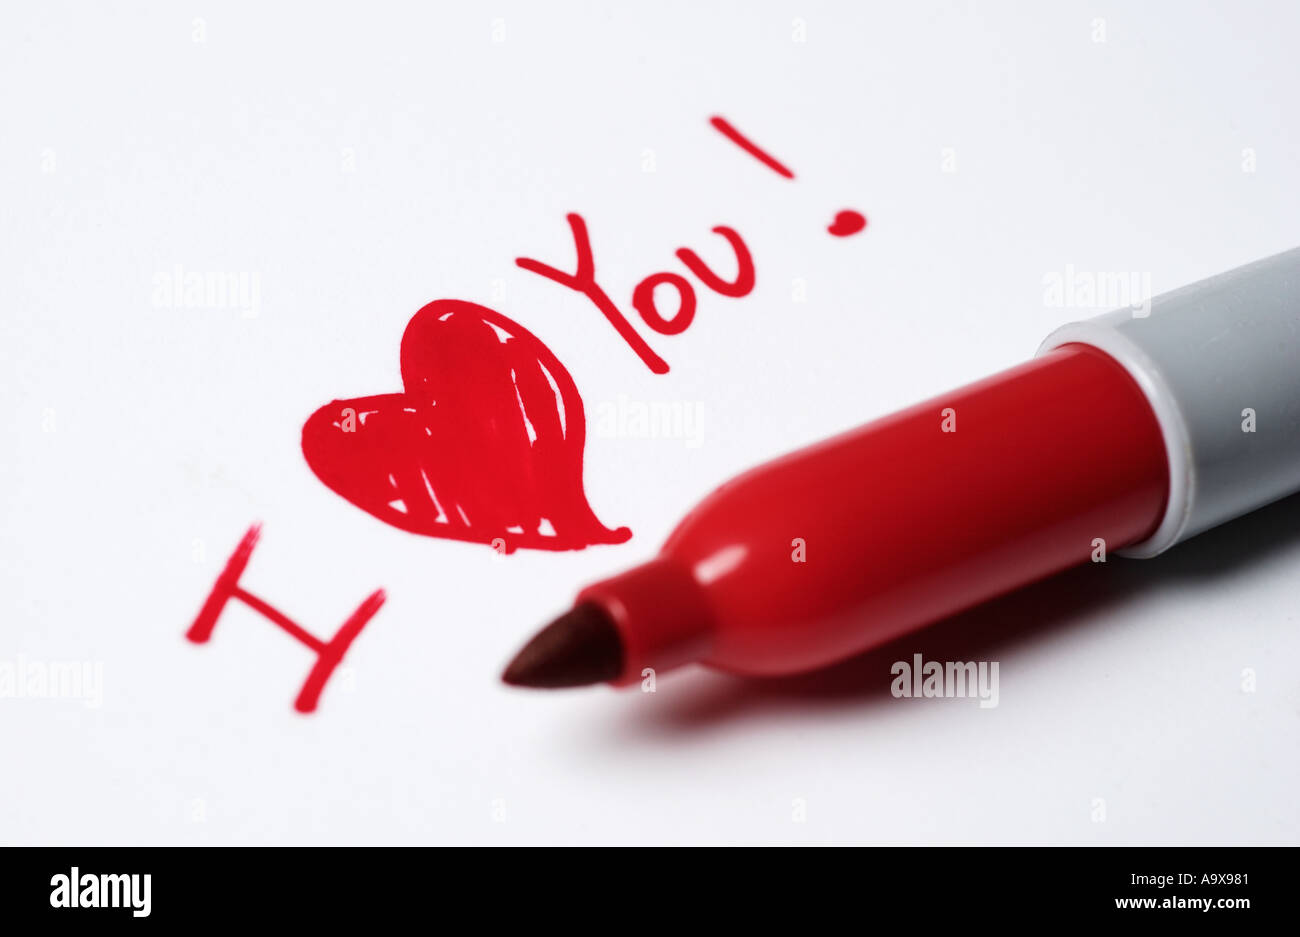 I Love You drawn on paper with red ink pen Stock Photo